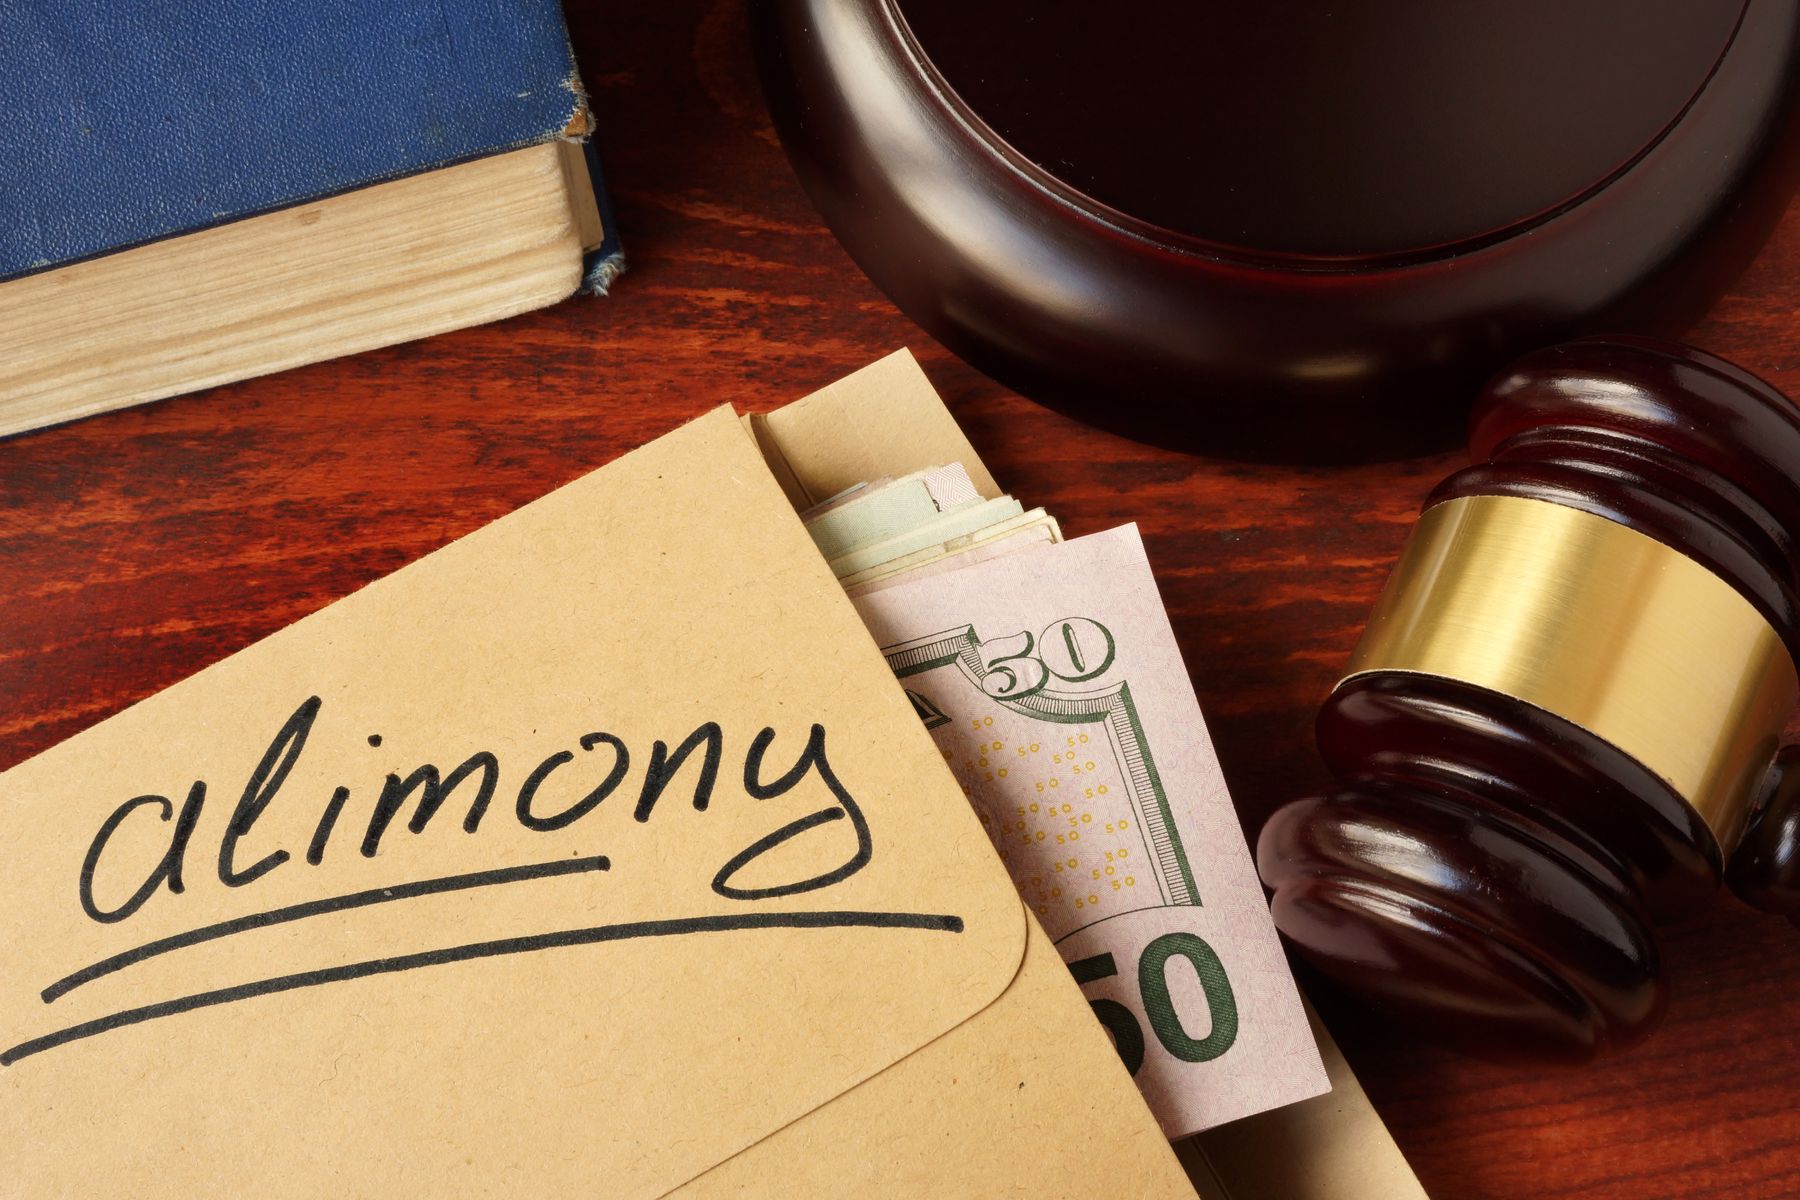 Spousal Support and Alimony